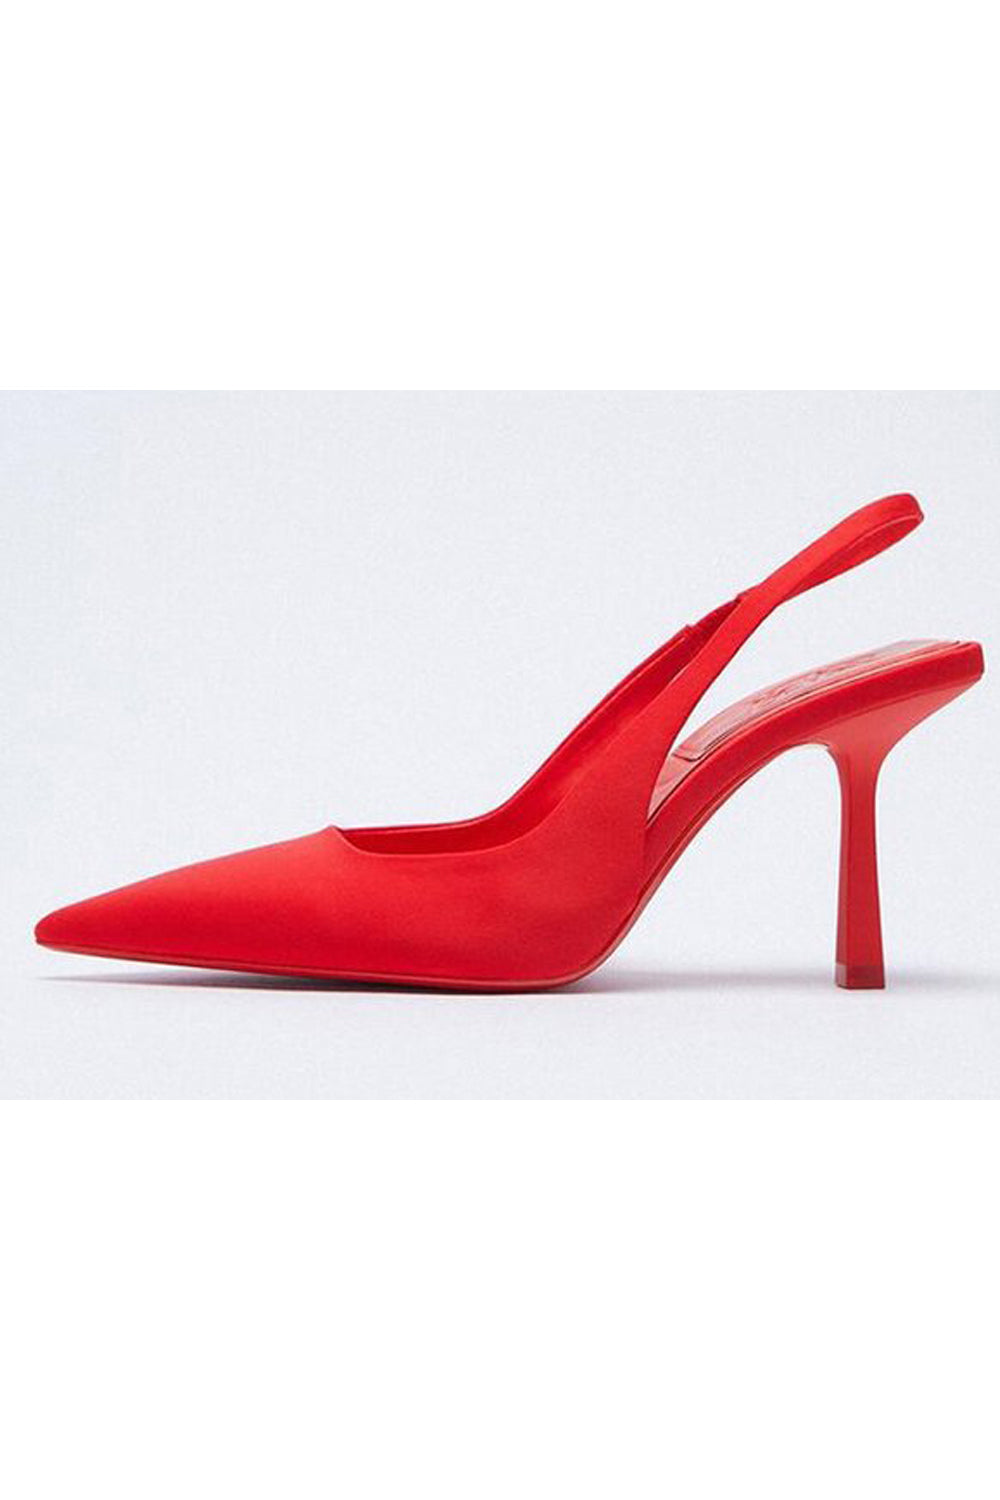 Women Lightweight Fantastic Solid Colored Stiletto Heel Pointed Toe Thin Strape Ankle Party Pumps - WSHP110500